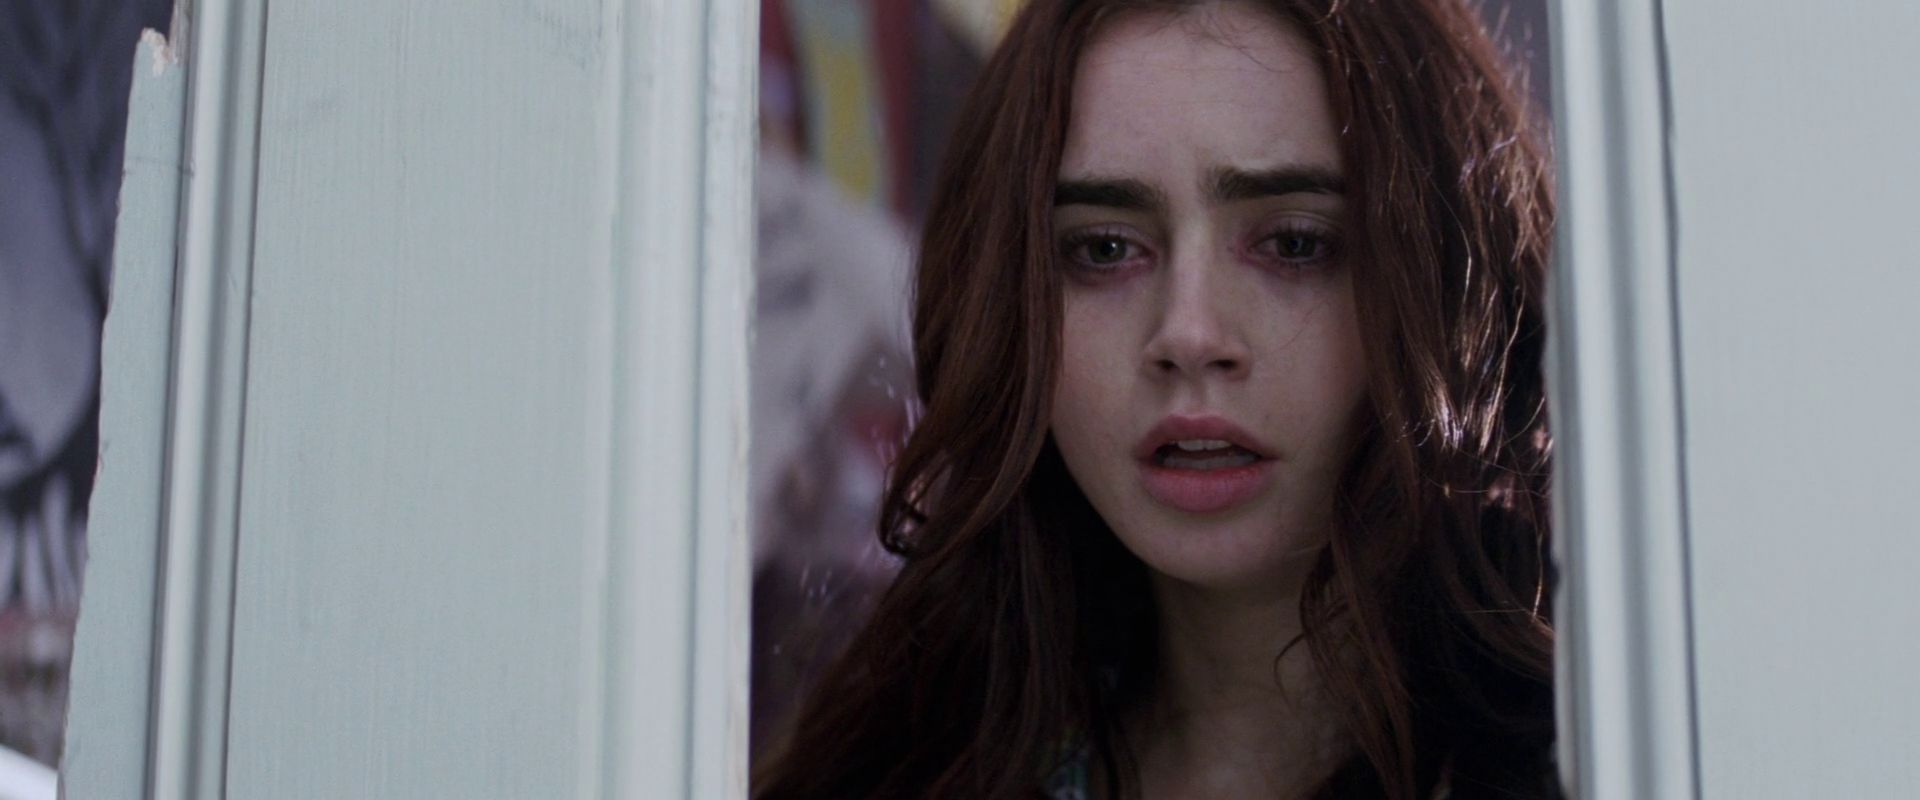 Photo of Clary Fray Screencaps for fans of City of Bones Movie. 